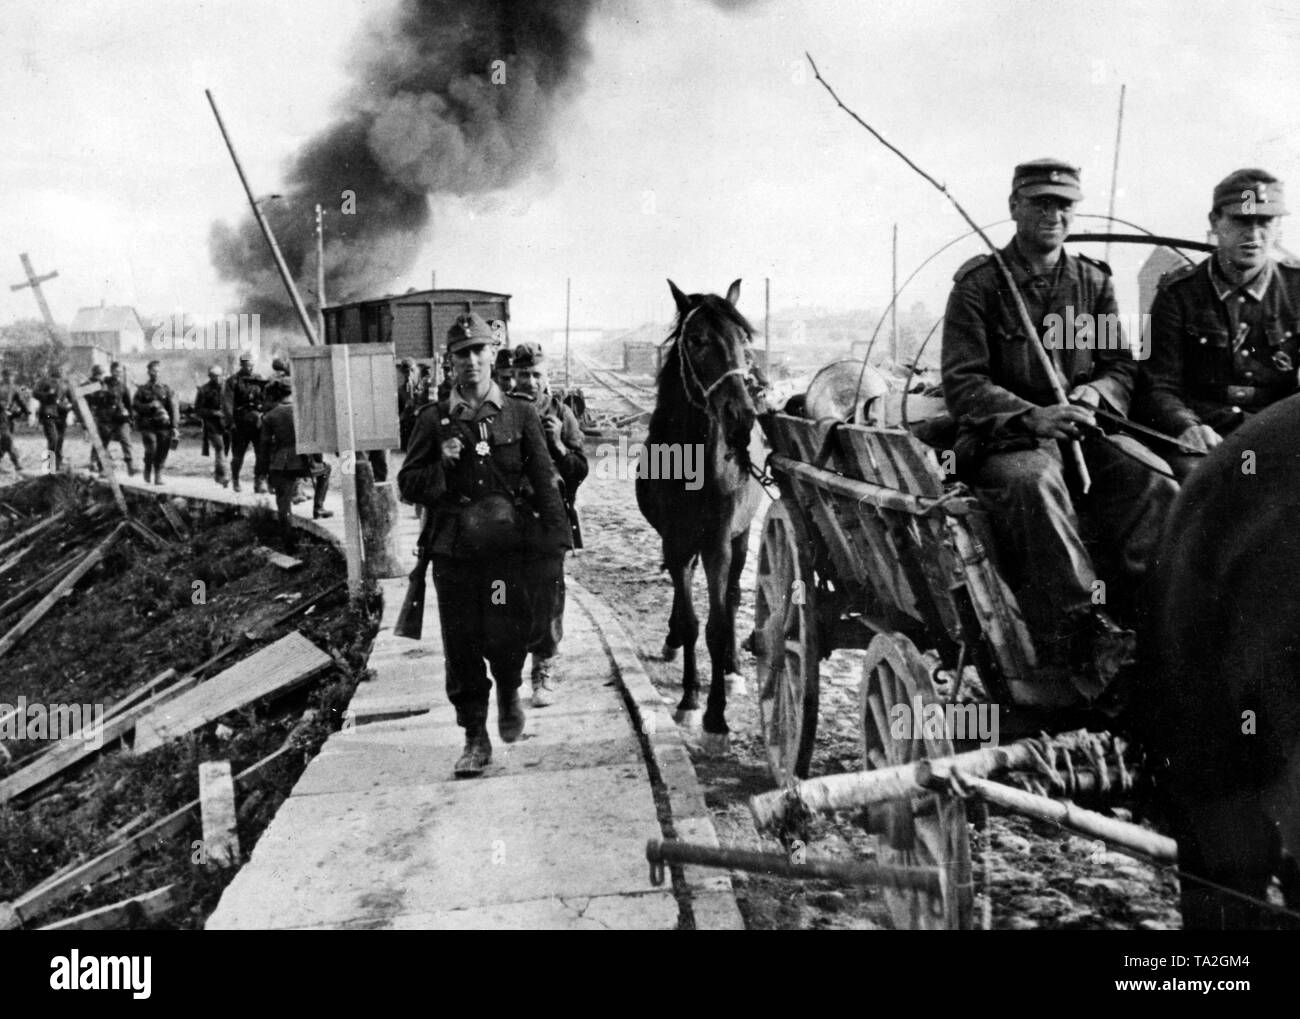 German soldiers on the return march in Latvia. In front, the group leader awarded with an Iron Cross 2nd class. In the background, a burning hut. Photo of the Propaganda Company (PK): war correspondent Schroeter. Stock Photo